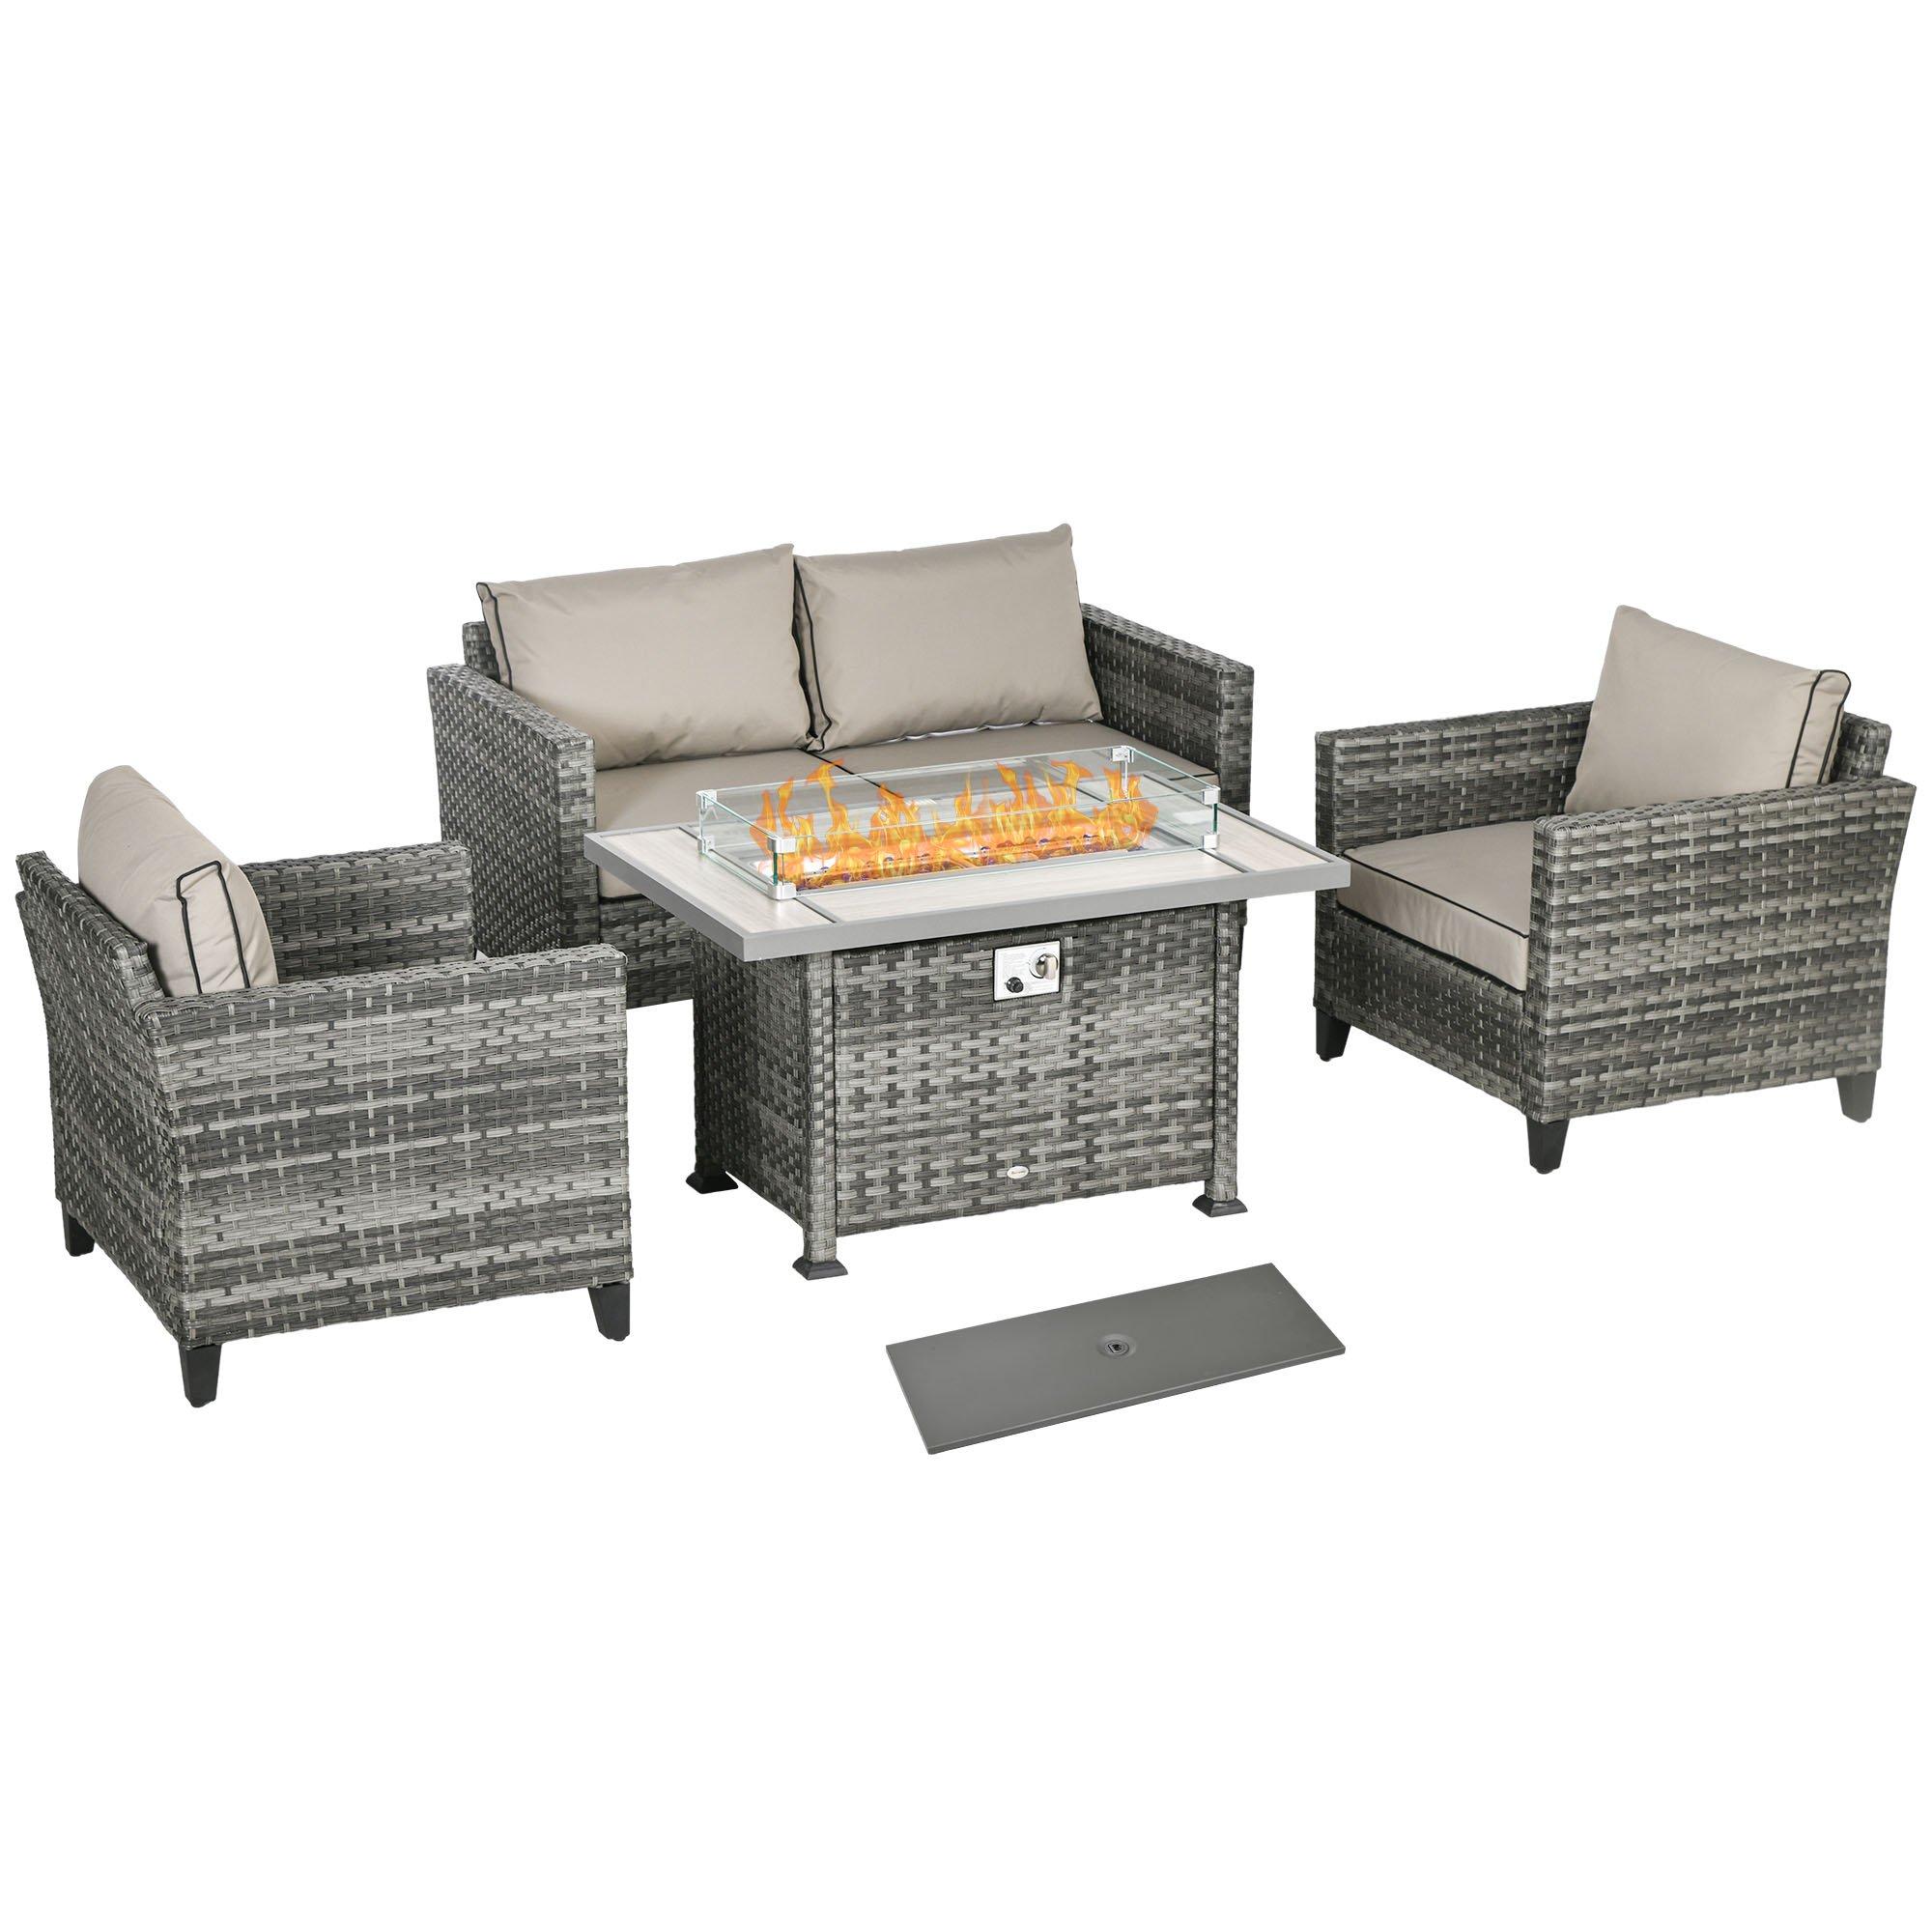 5 Pieces Rattan Garden Furniture Set with Gas Fire Pit Table, Cushion, Grey